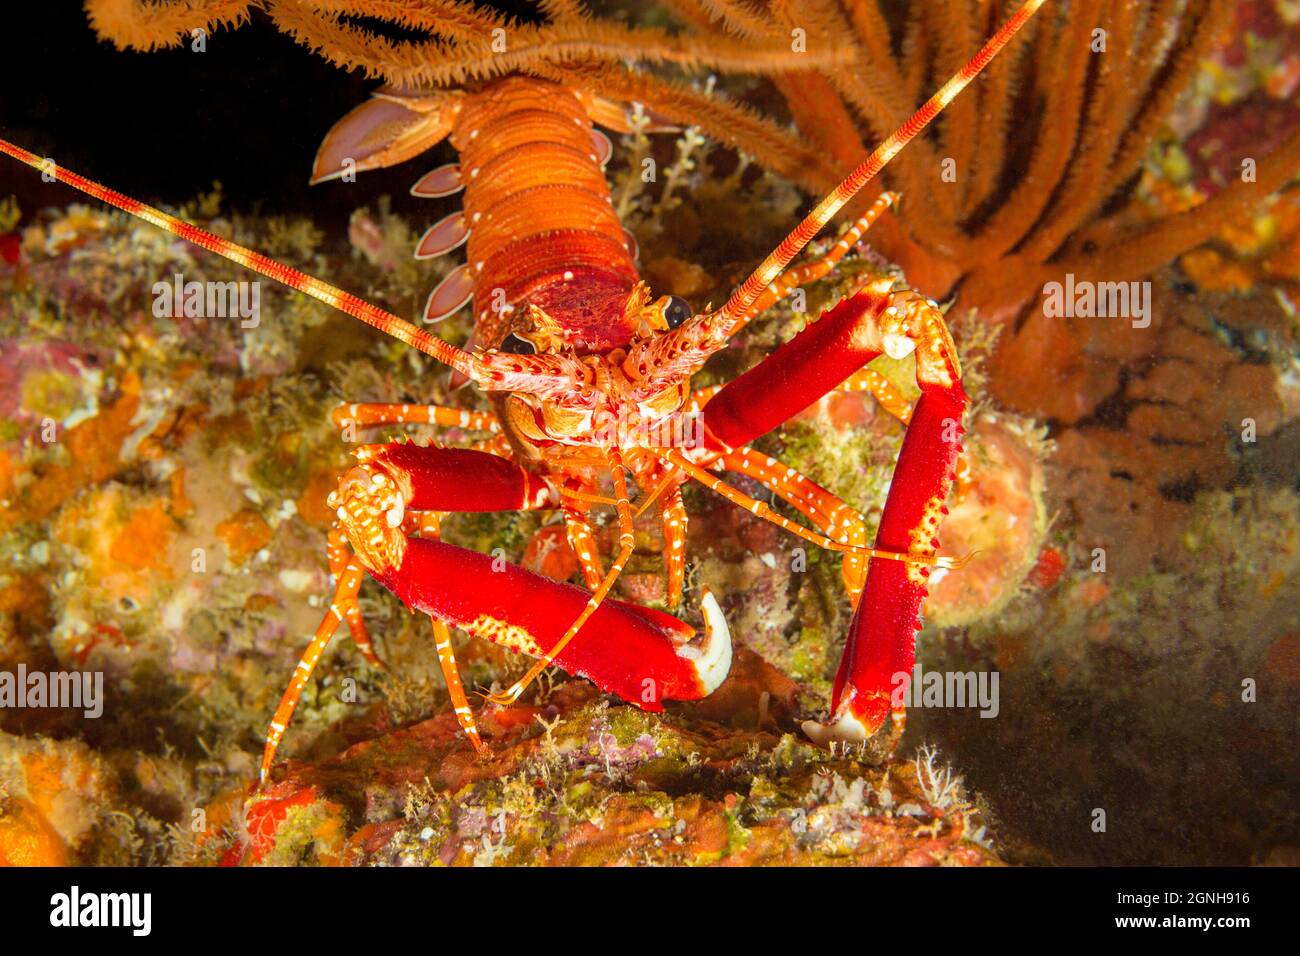 The long-handed spiny lobster, Justitia longimanus, is usually only found on the deeper sections of the reef in Hawaii. Stock Photo